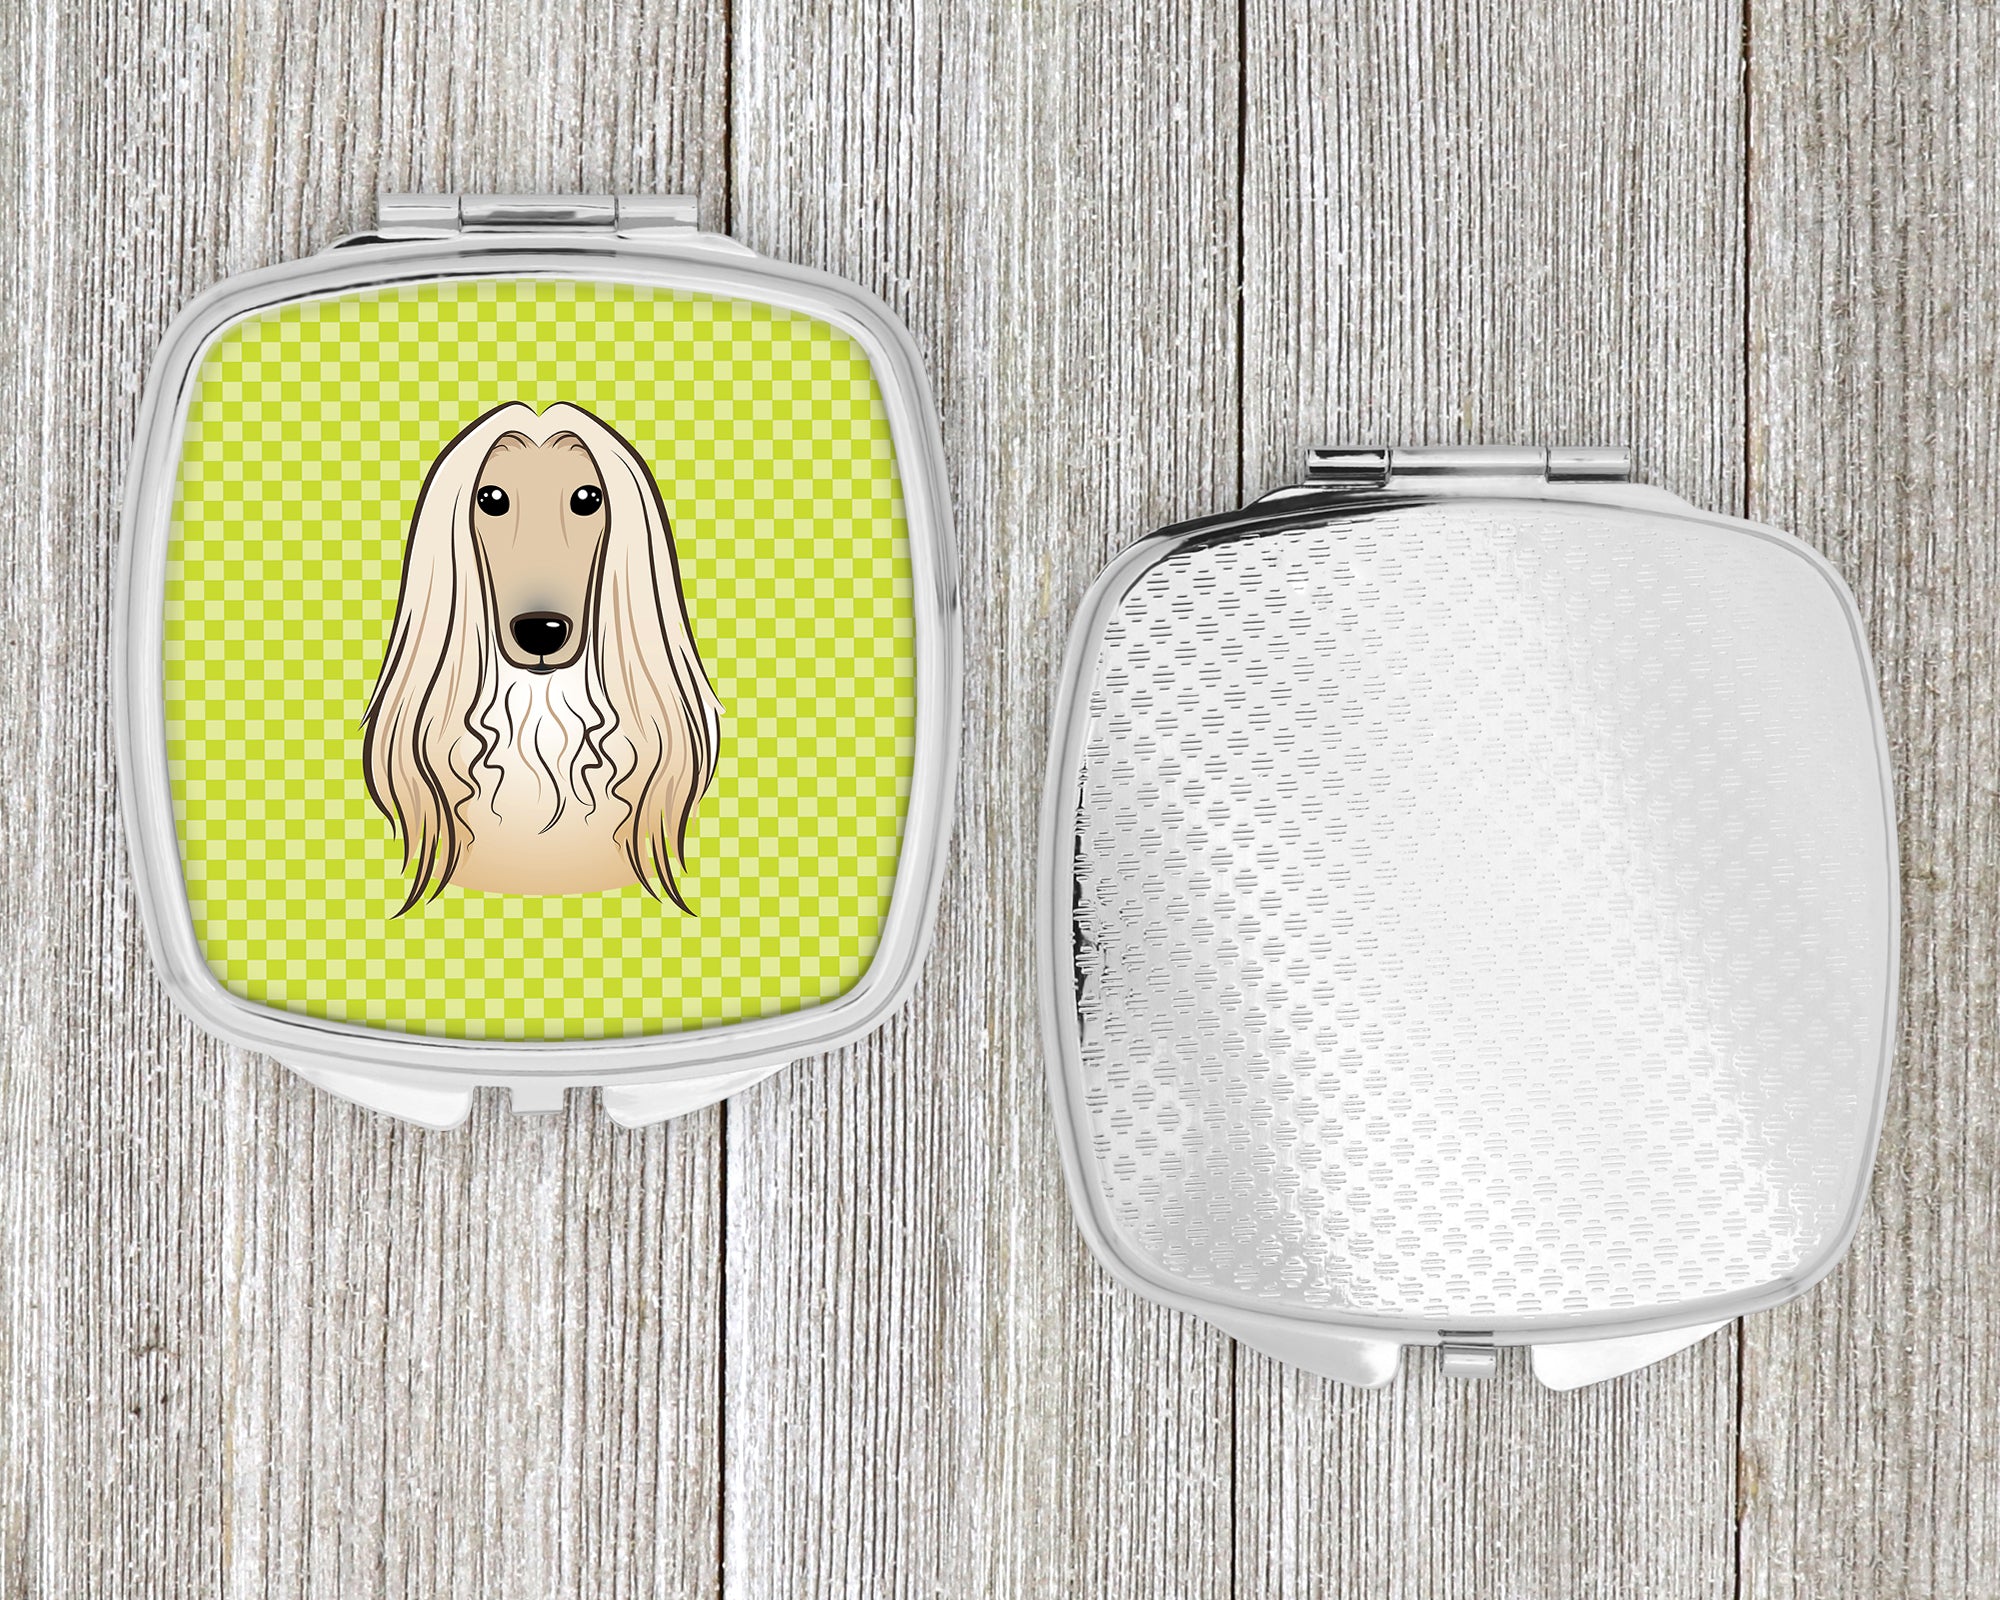 Checkerboard Lime Green Afghan Hound Compact Mirror BB1306SCM